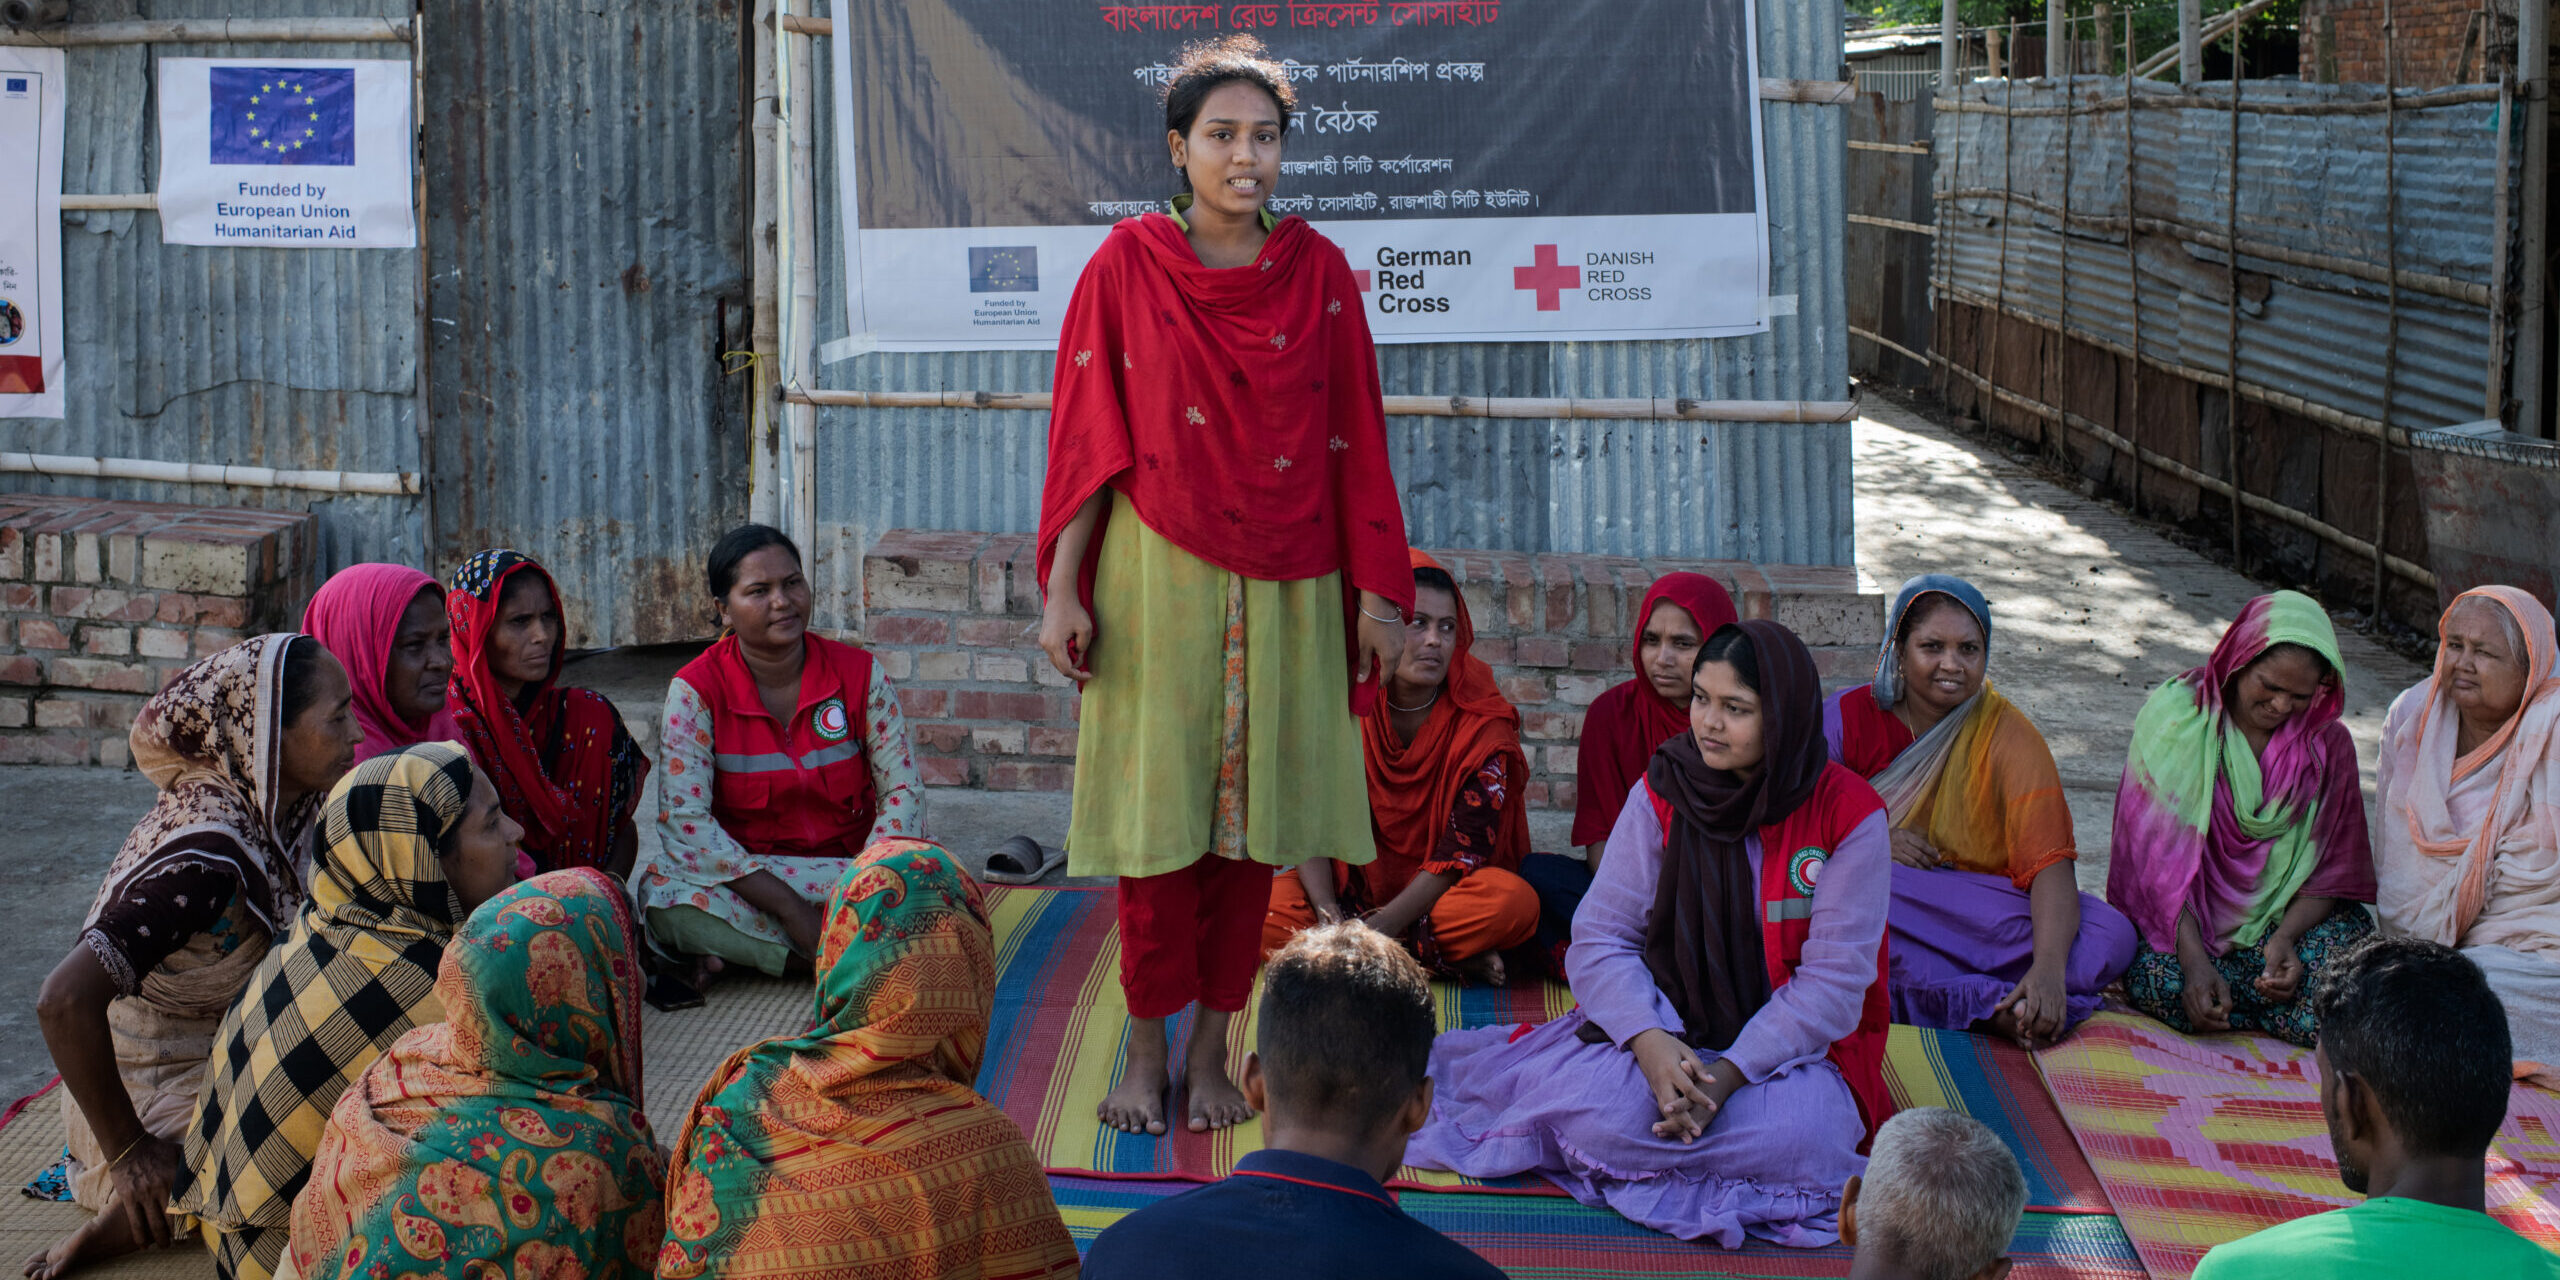 A Red Cresent volunteer standing before a group of women in Bangladesh informing how to cope with heatwaves